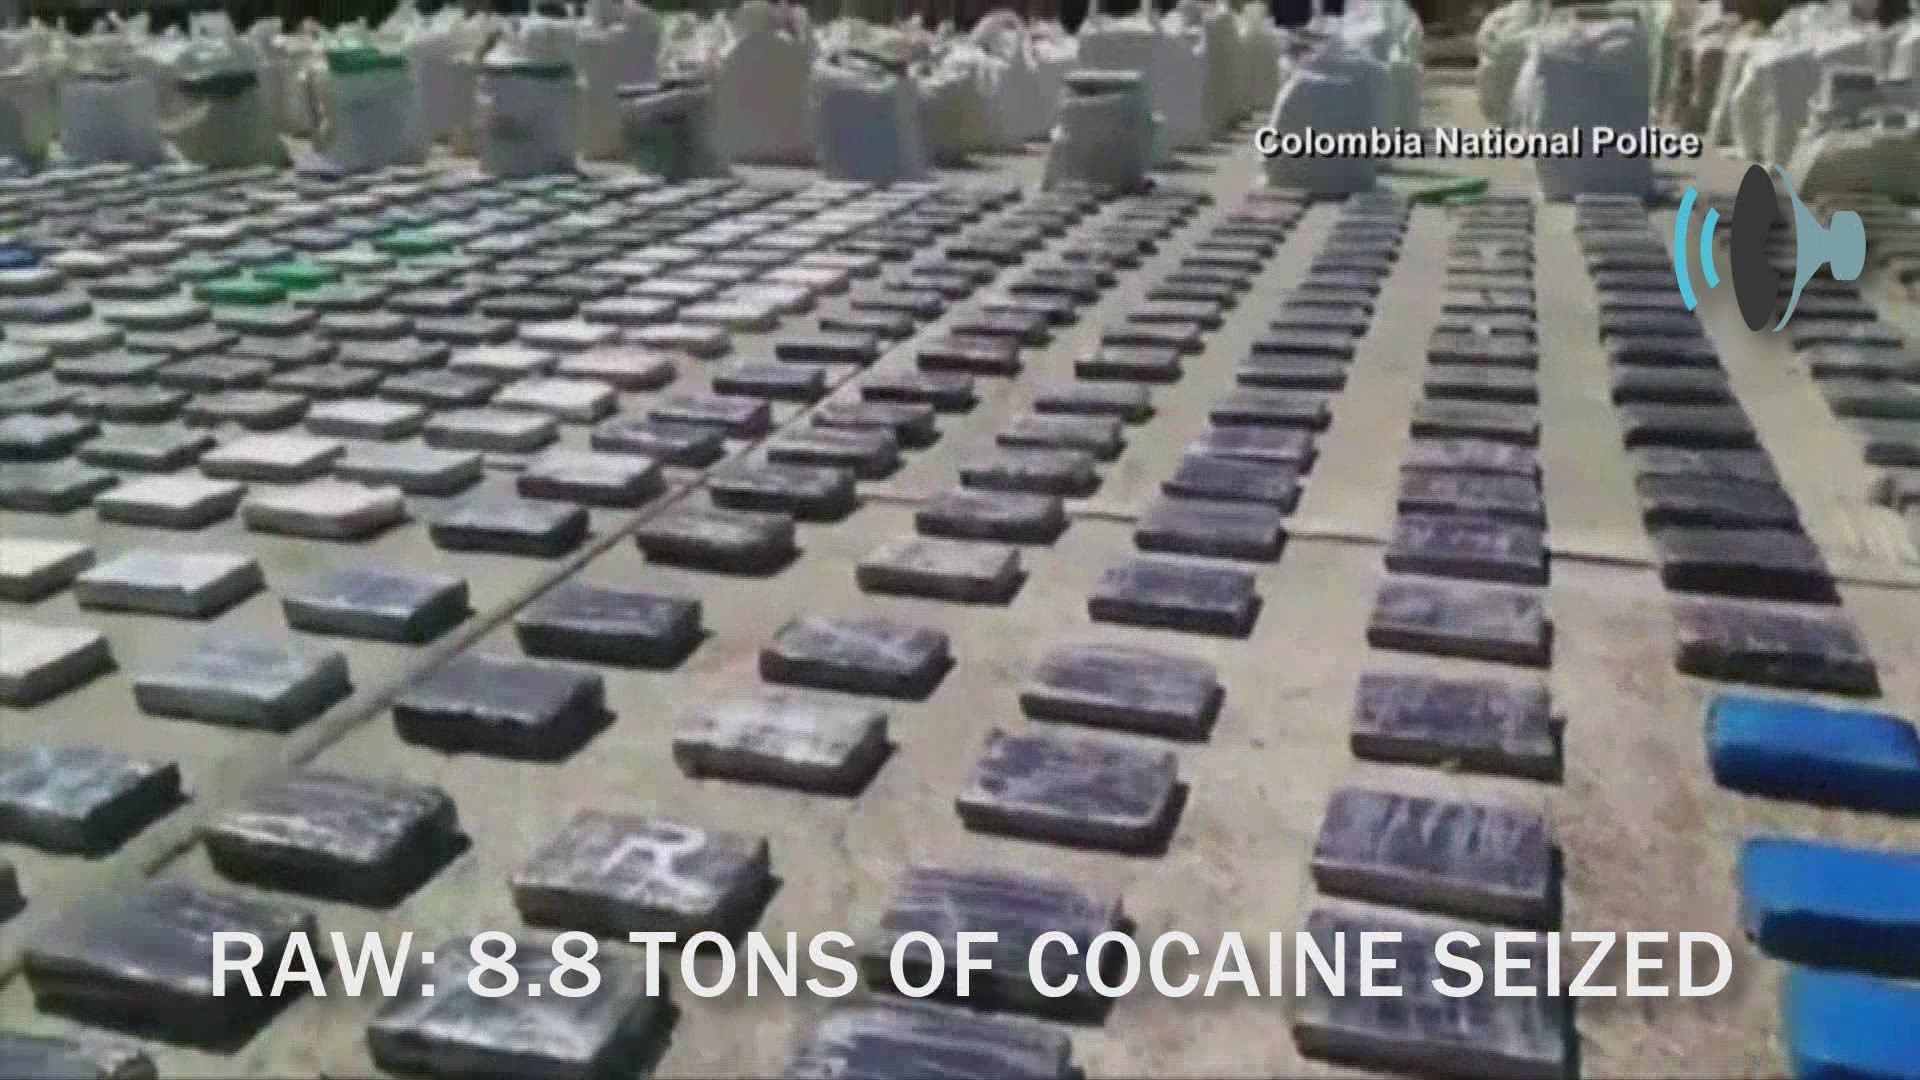 Colombian officials seized nearly 9 tons of cocaine worth an estimated $240 million.